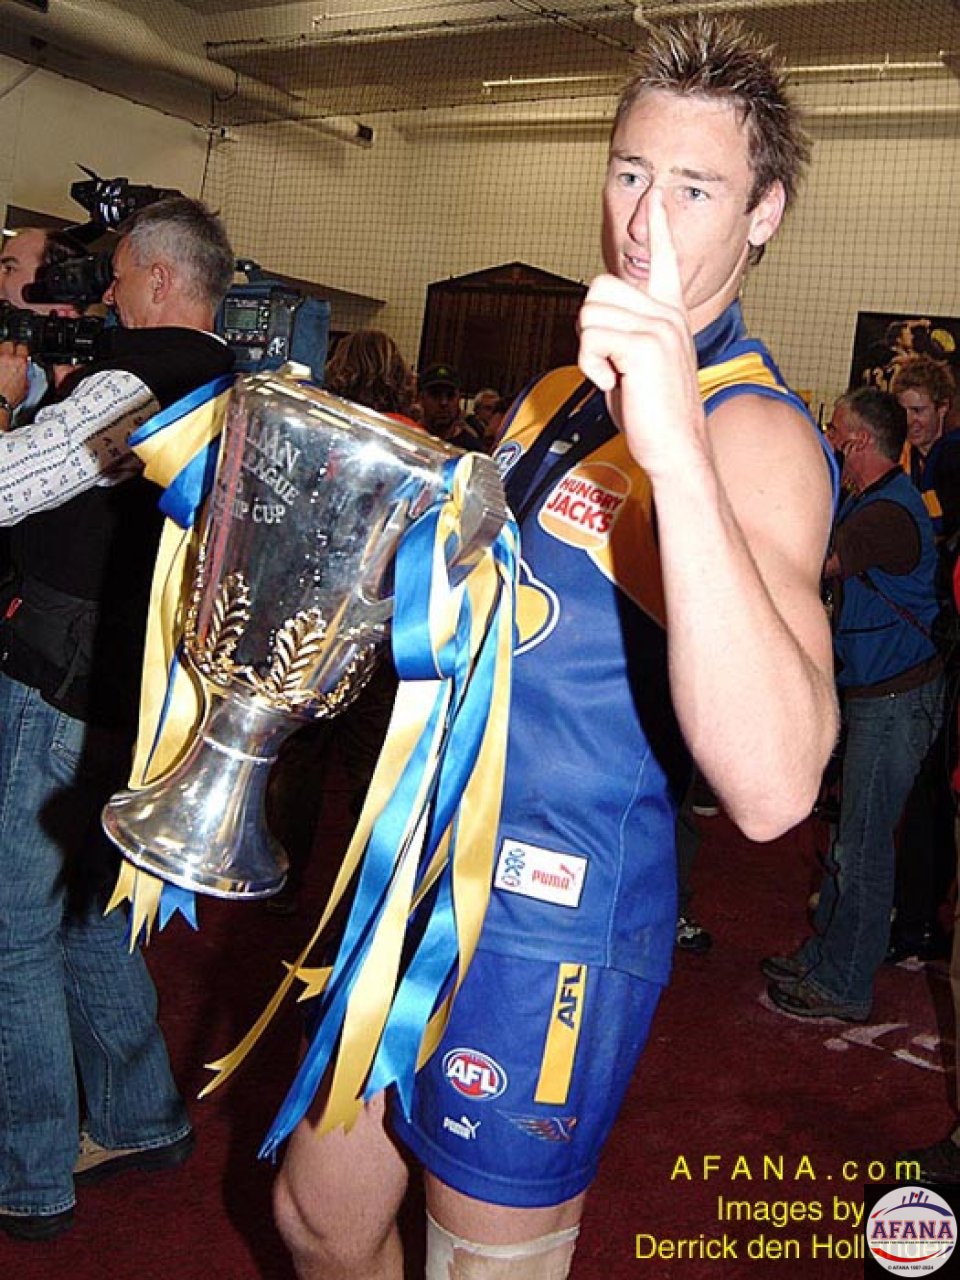 [b]The spils of victory, the treasured Premiers Cup and the no.1 salute[/b]